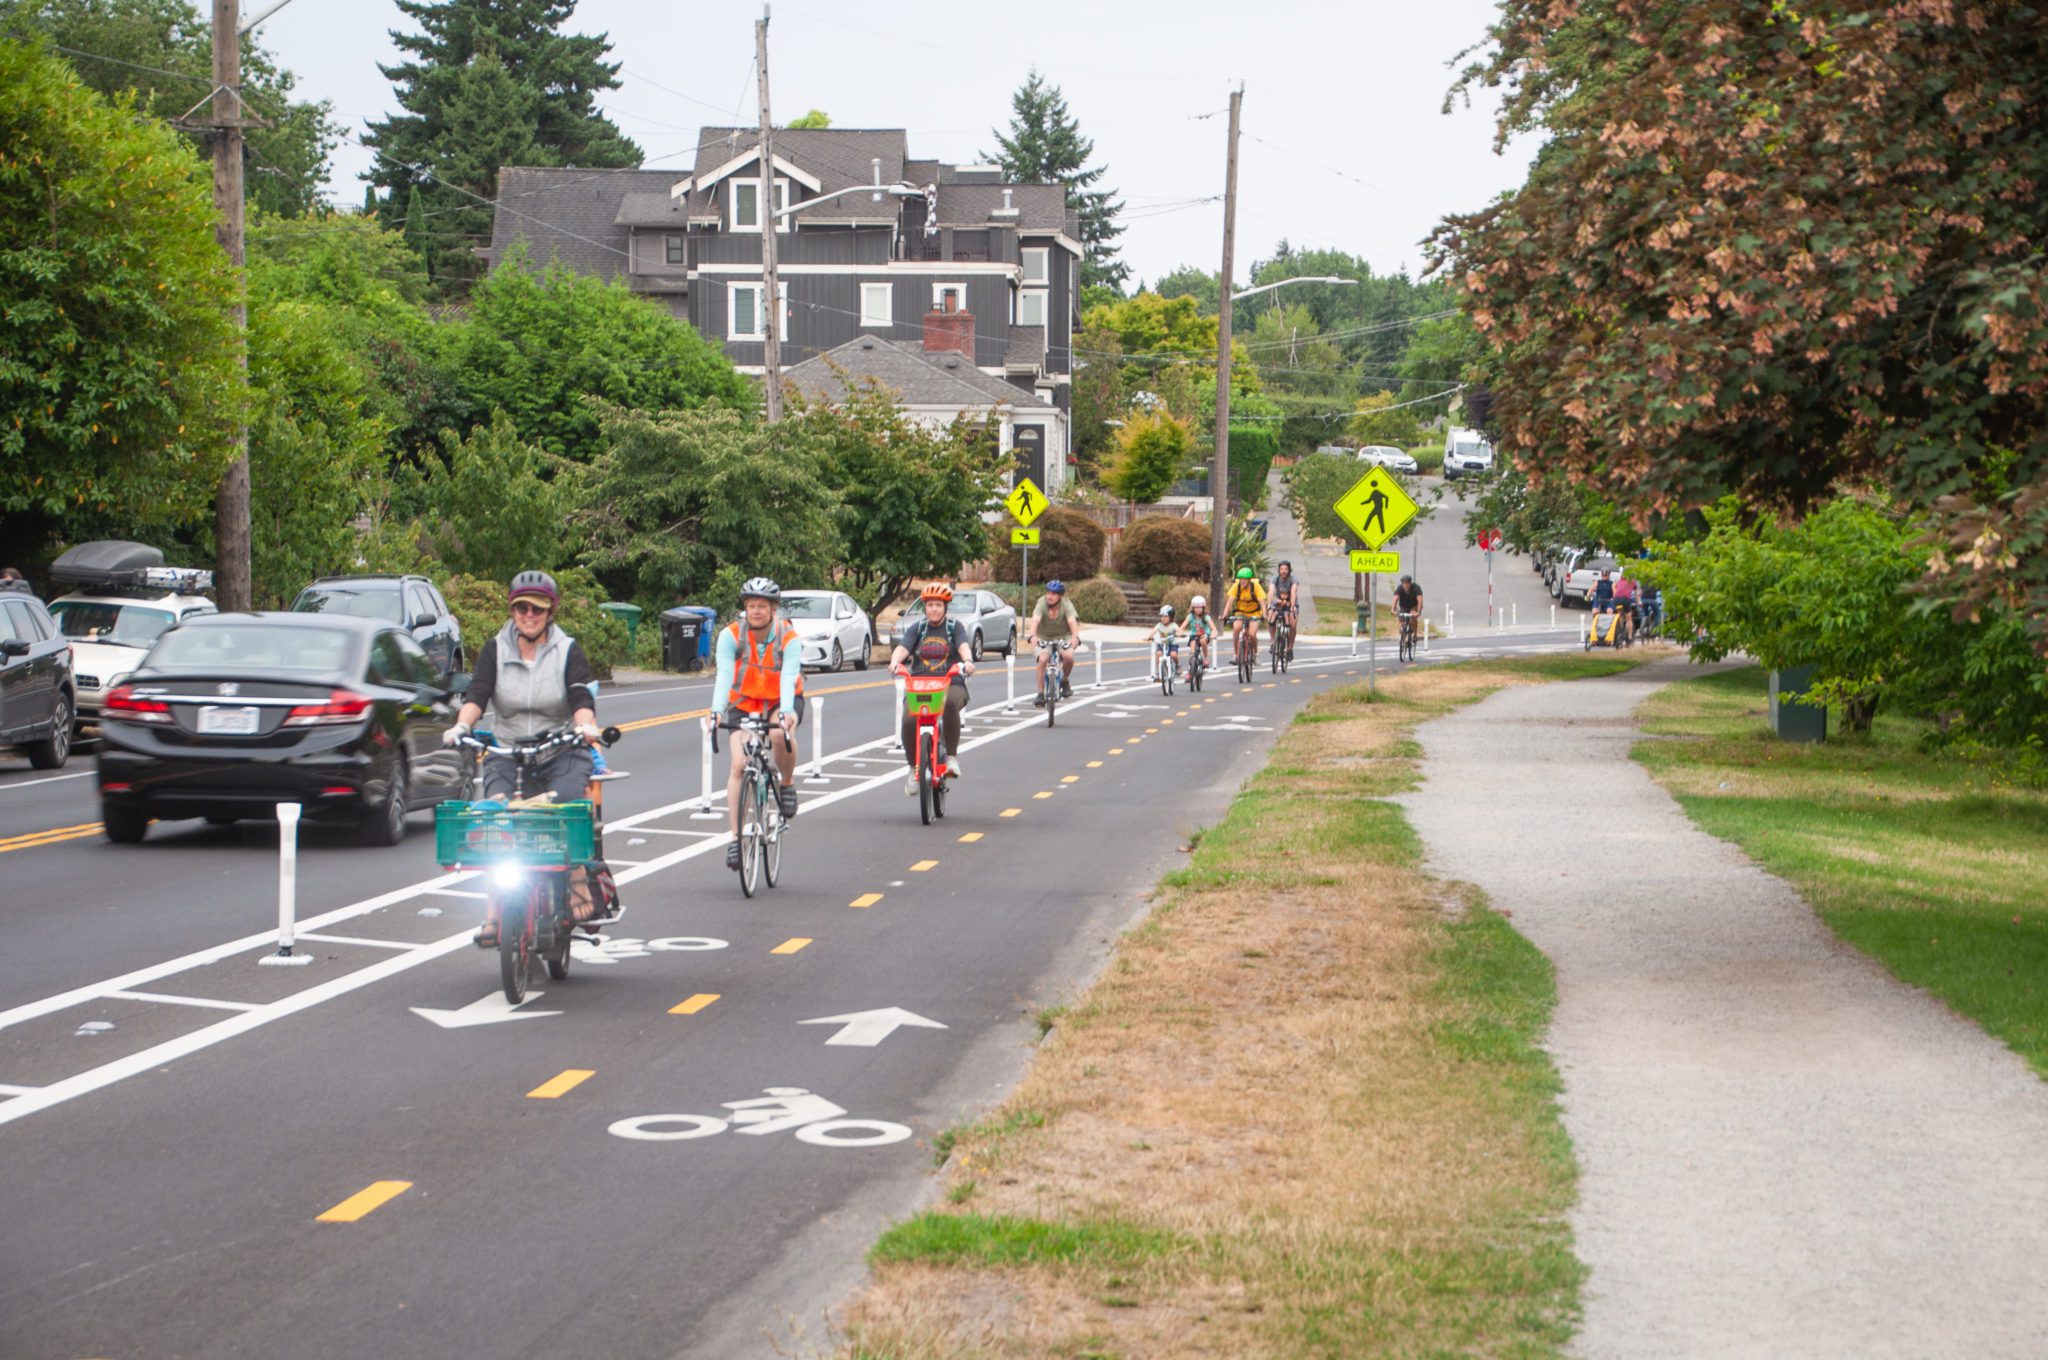 A group of nine cyclists riding bikes around Green Lake’s protected bike lane during the day